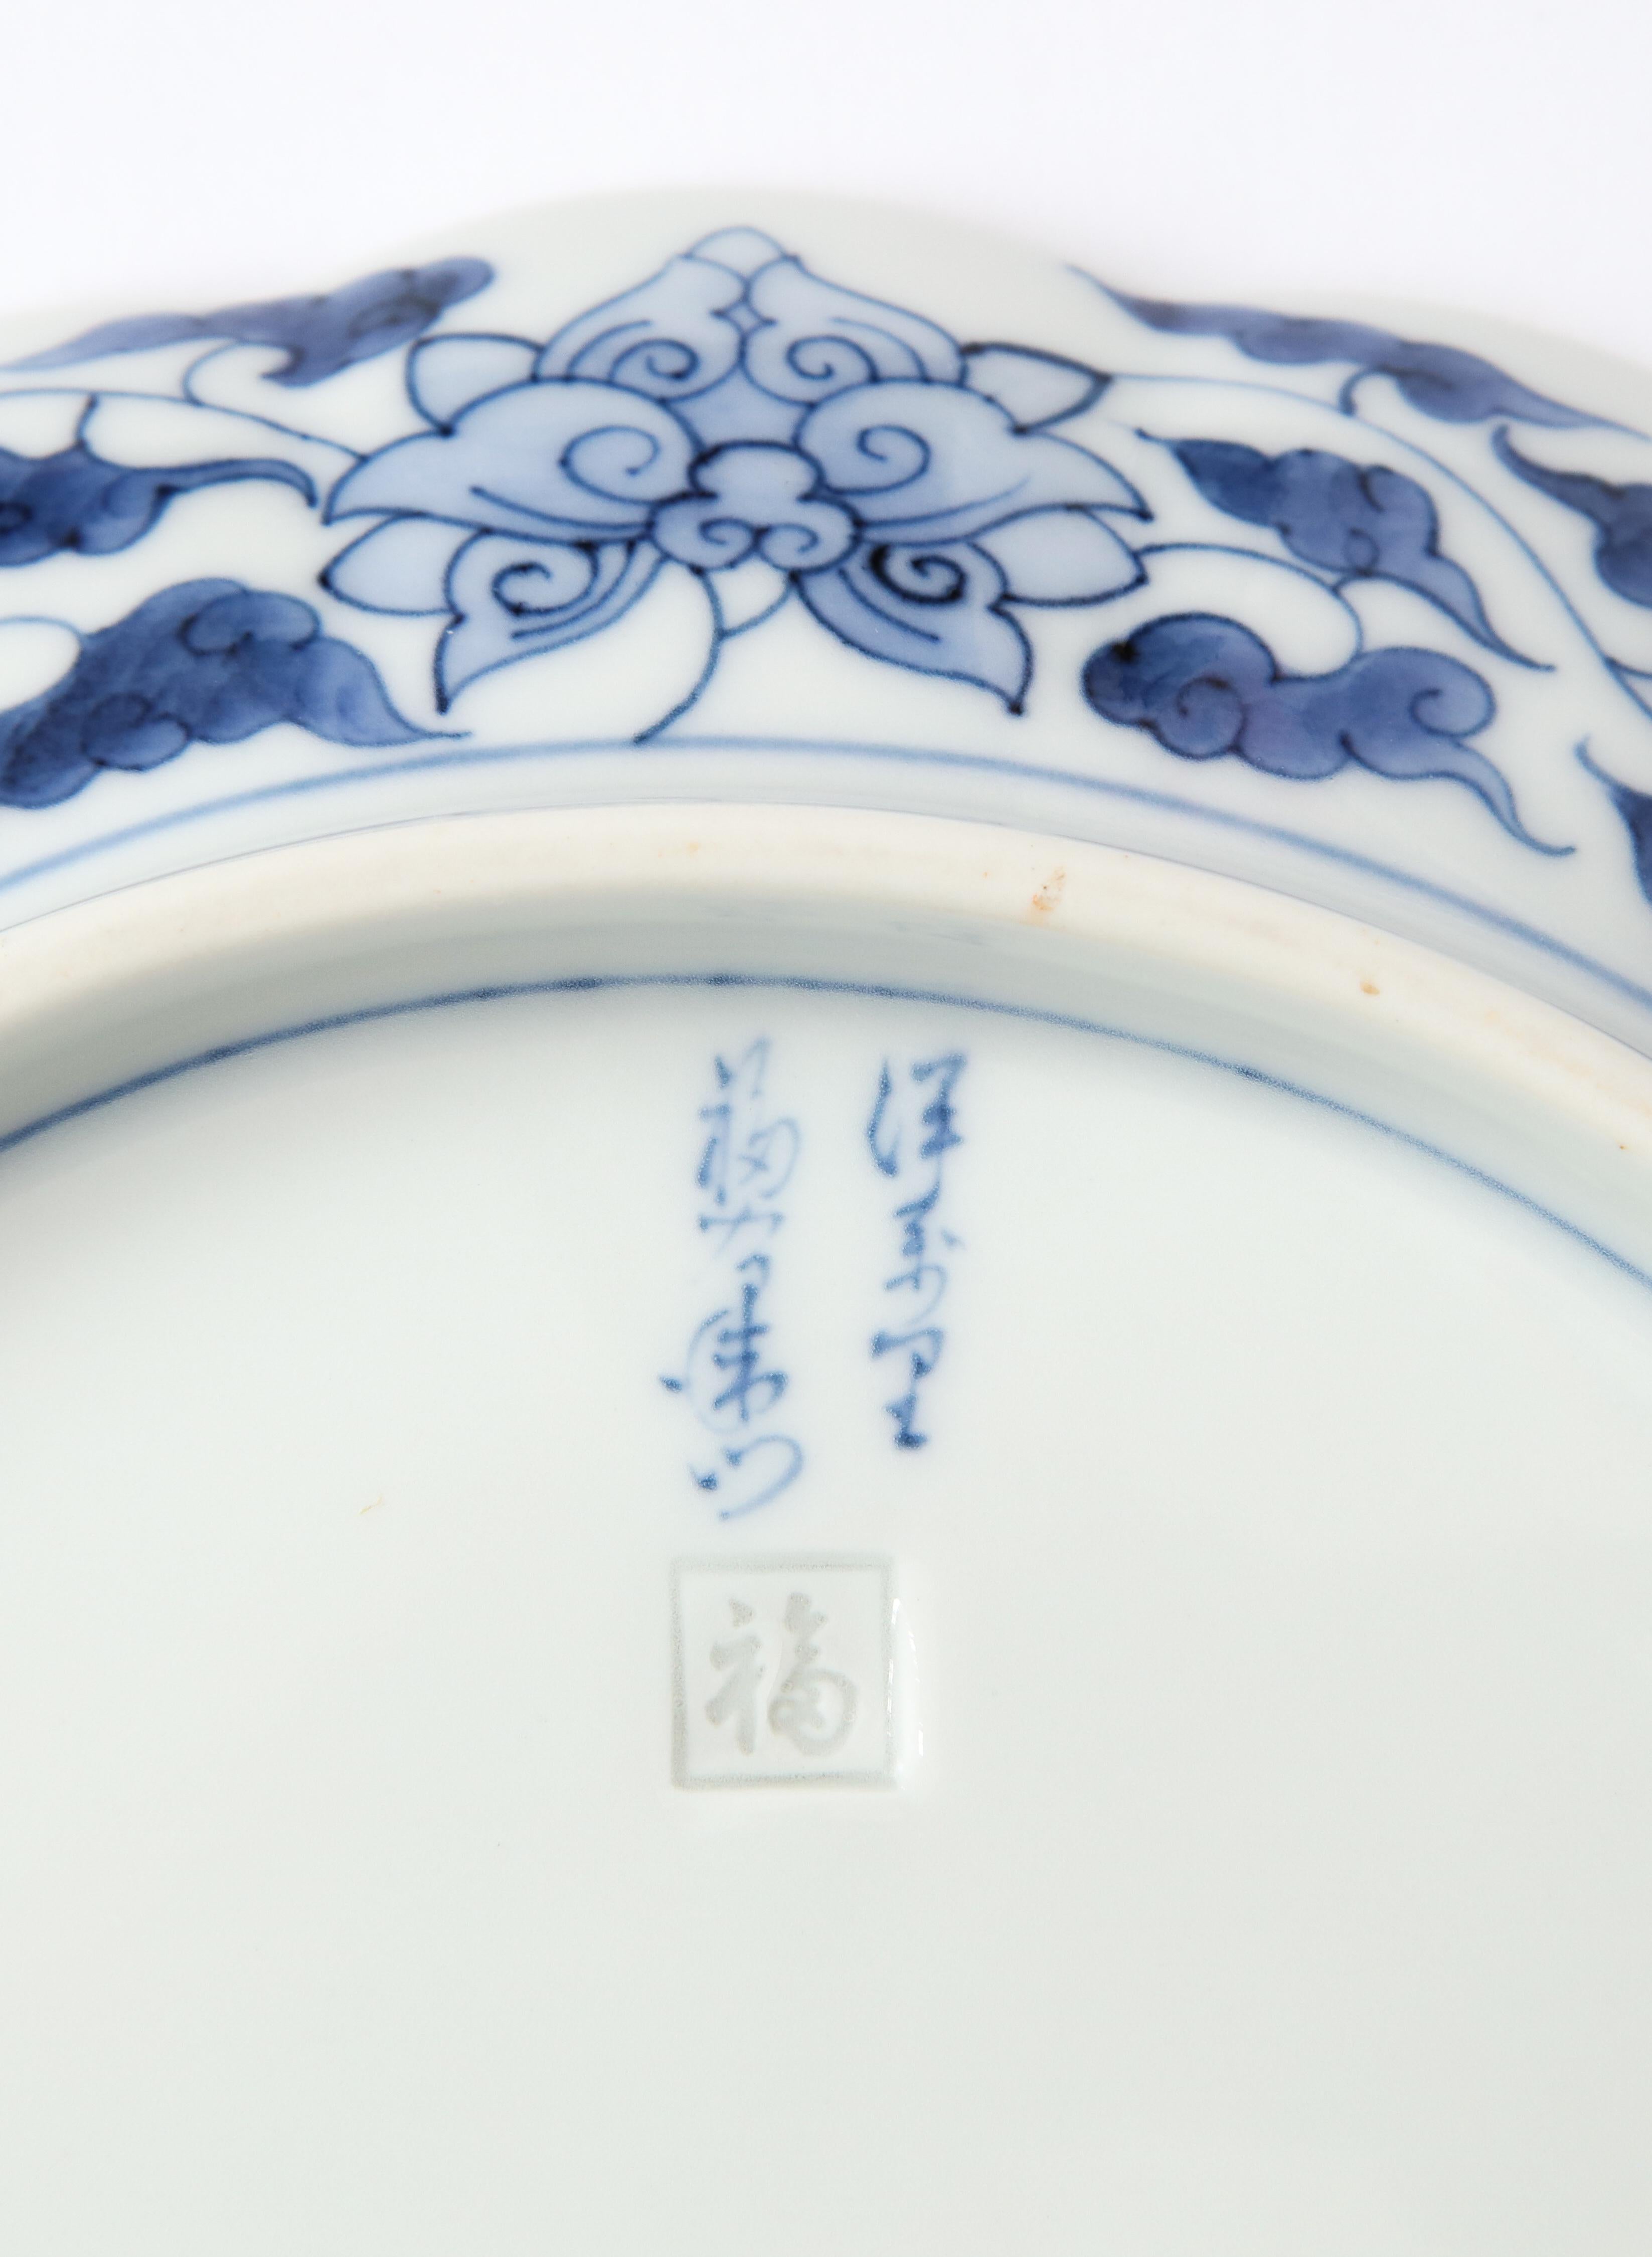 Porcelain Japanese Plates by Fukuemon  - Abstract Sculpture by Unknown